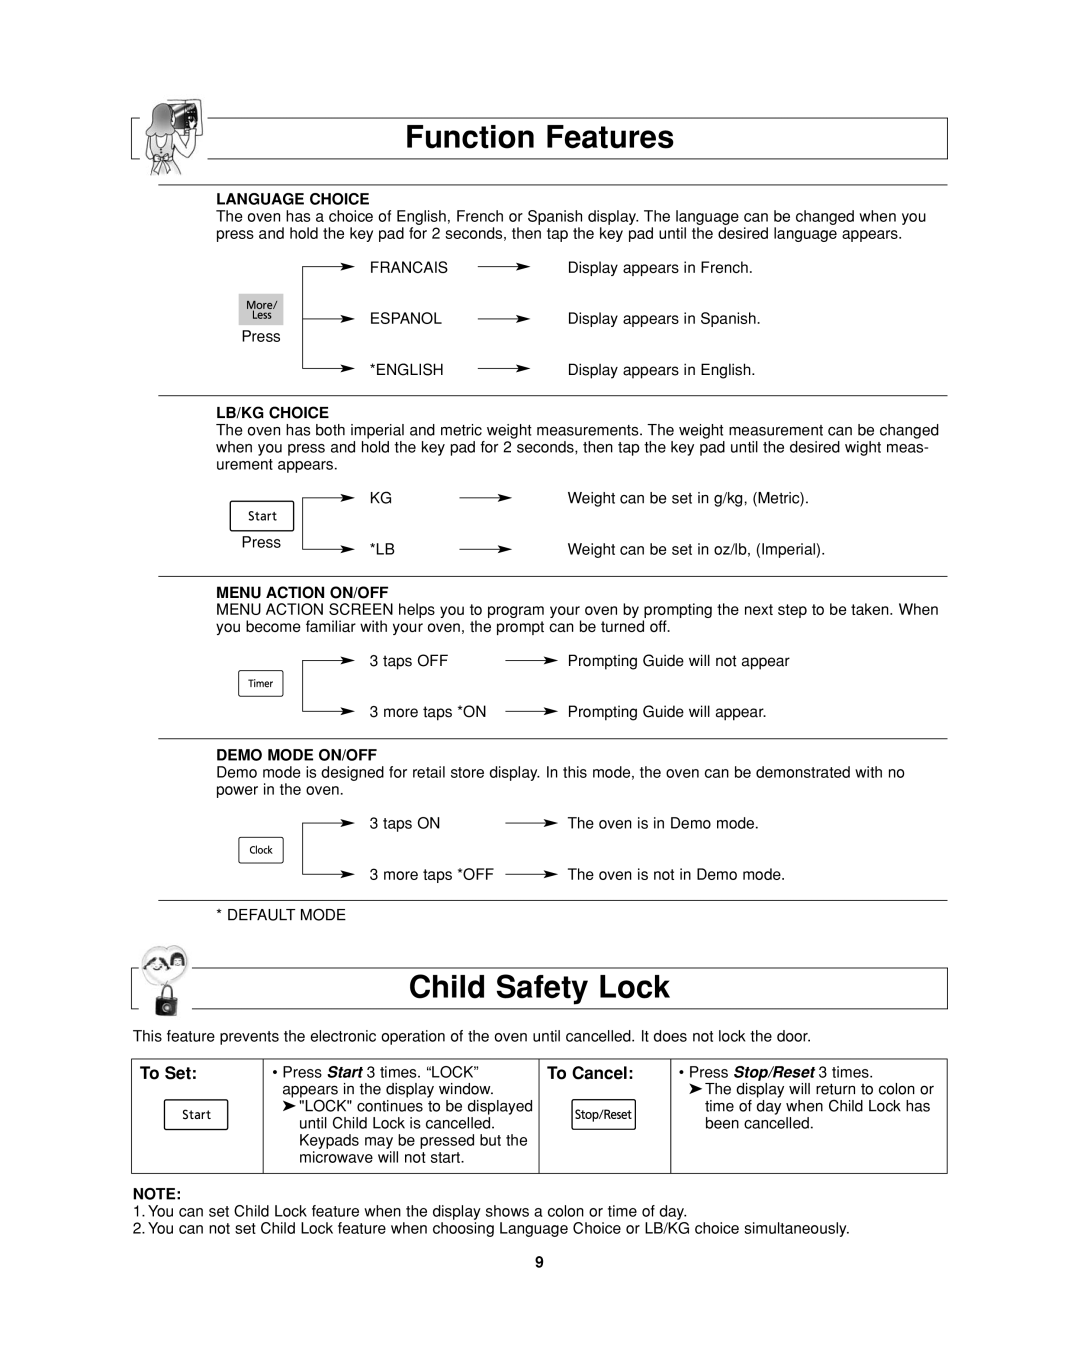 Panasonic NN-SD277 important safety instructions Function Features, Child Safety Lock, To Set, To Cancel 